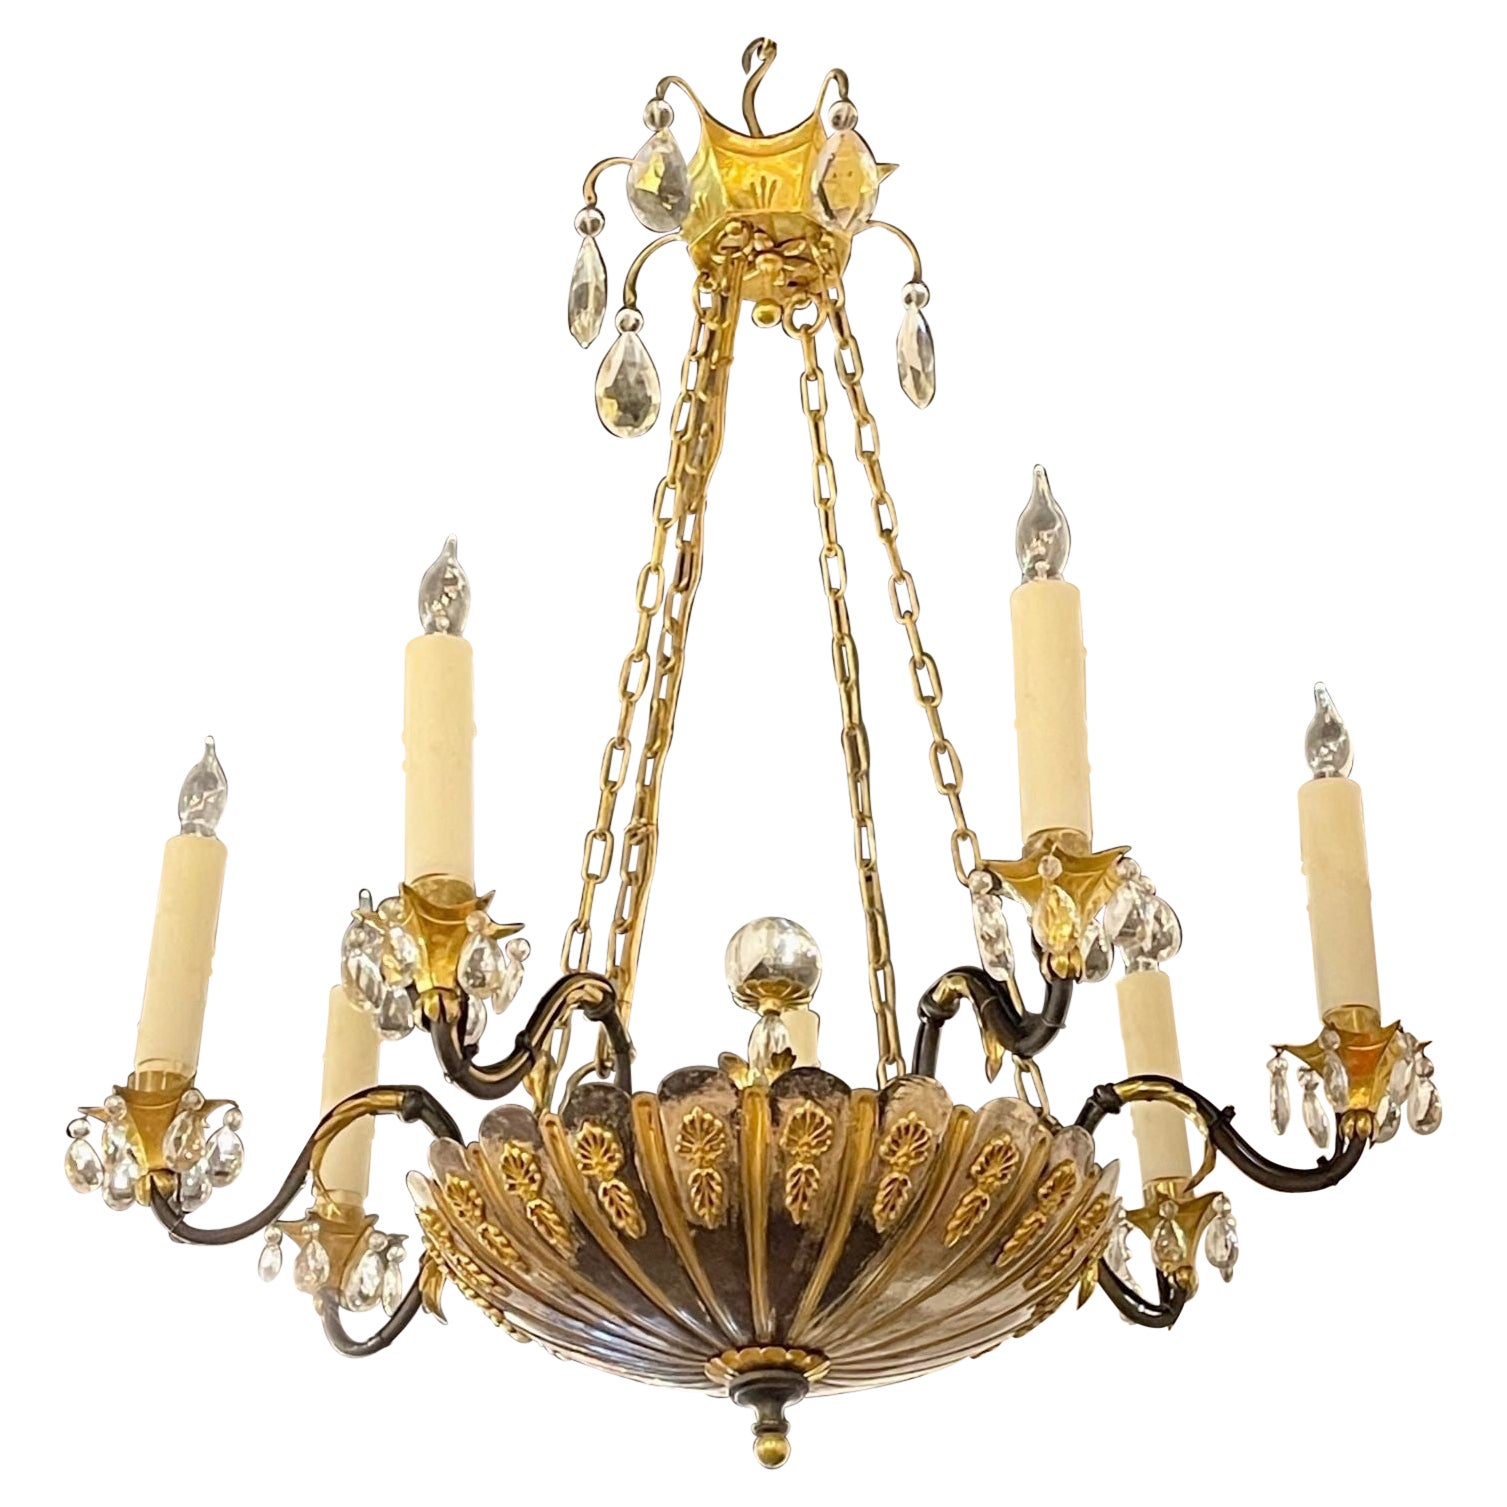 19th Century English Silver and Bronze 7 Light Chandelier